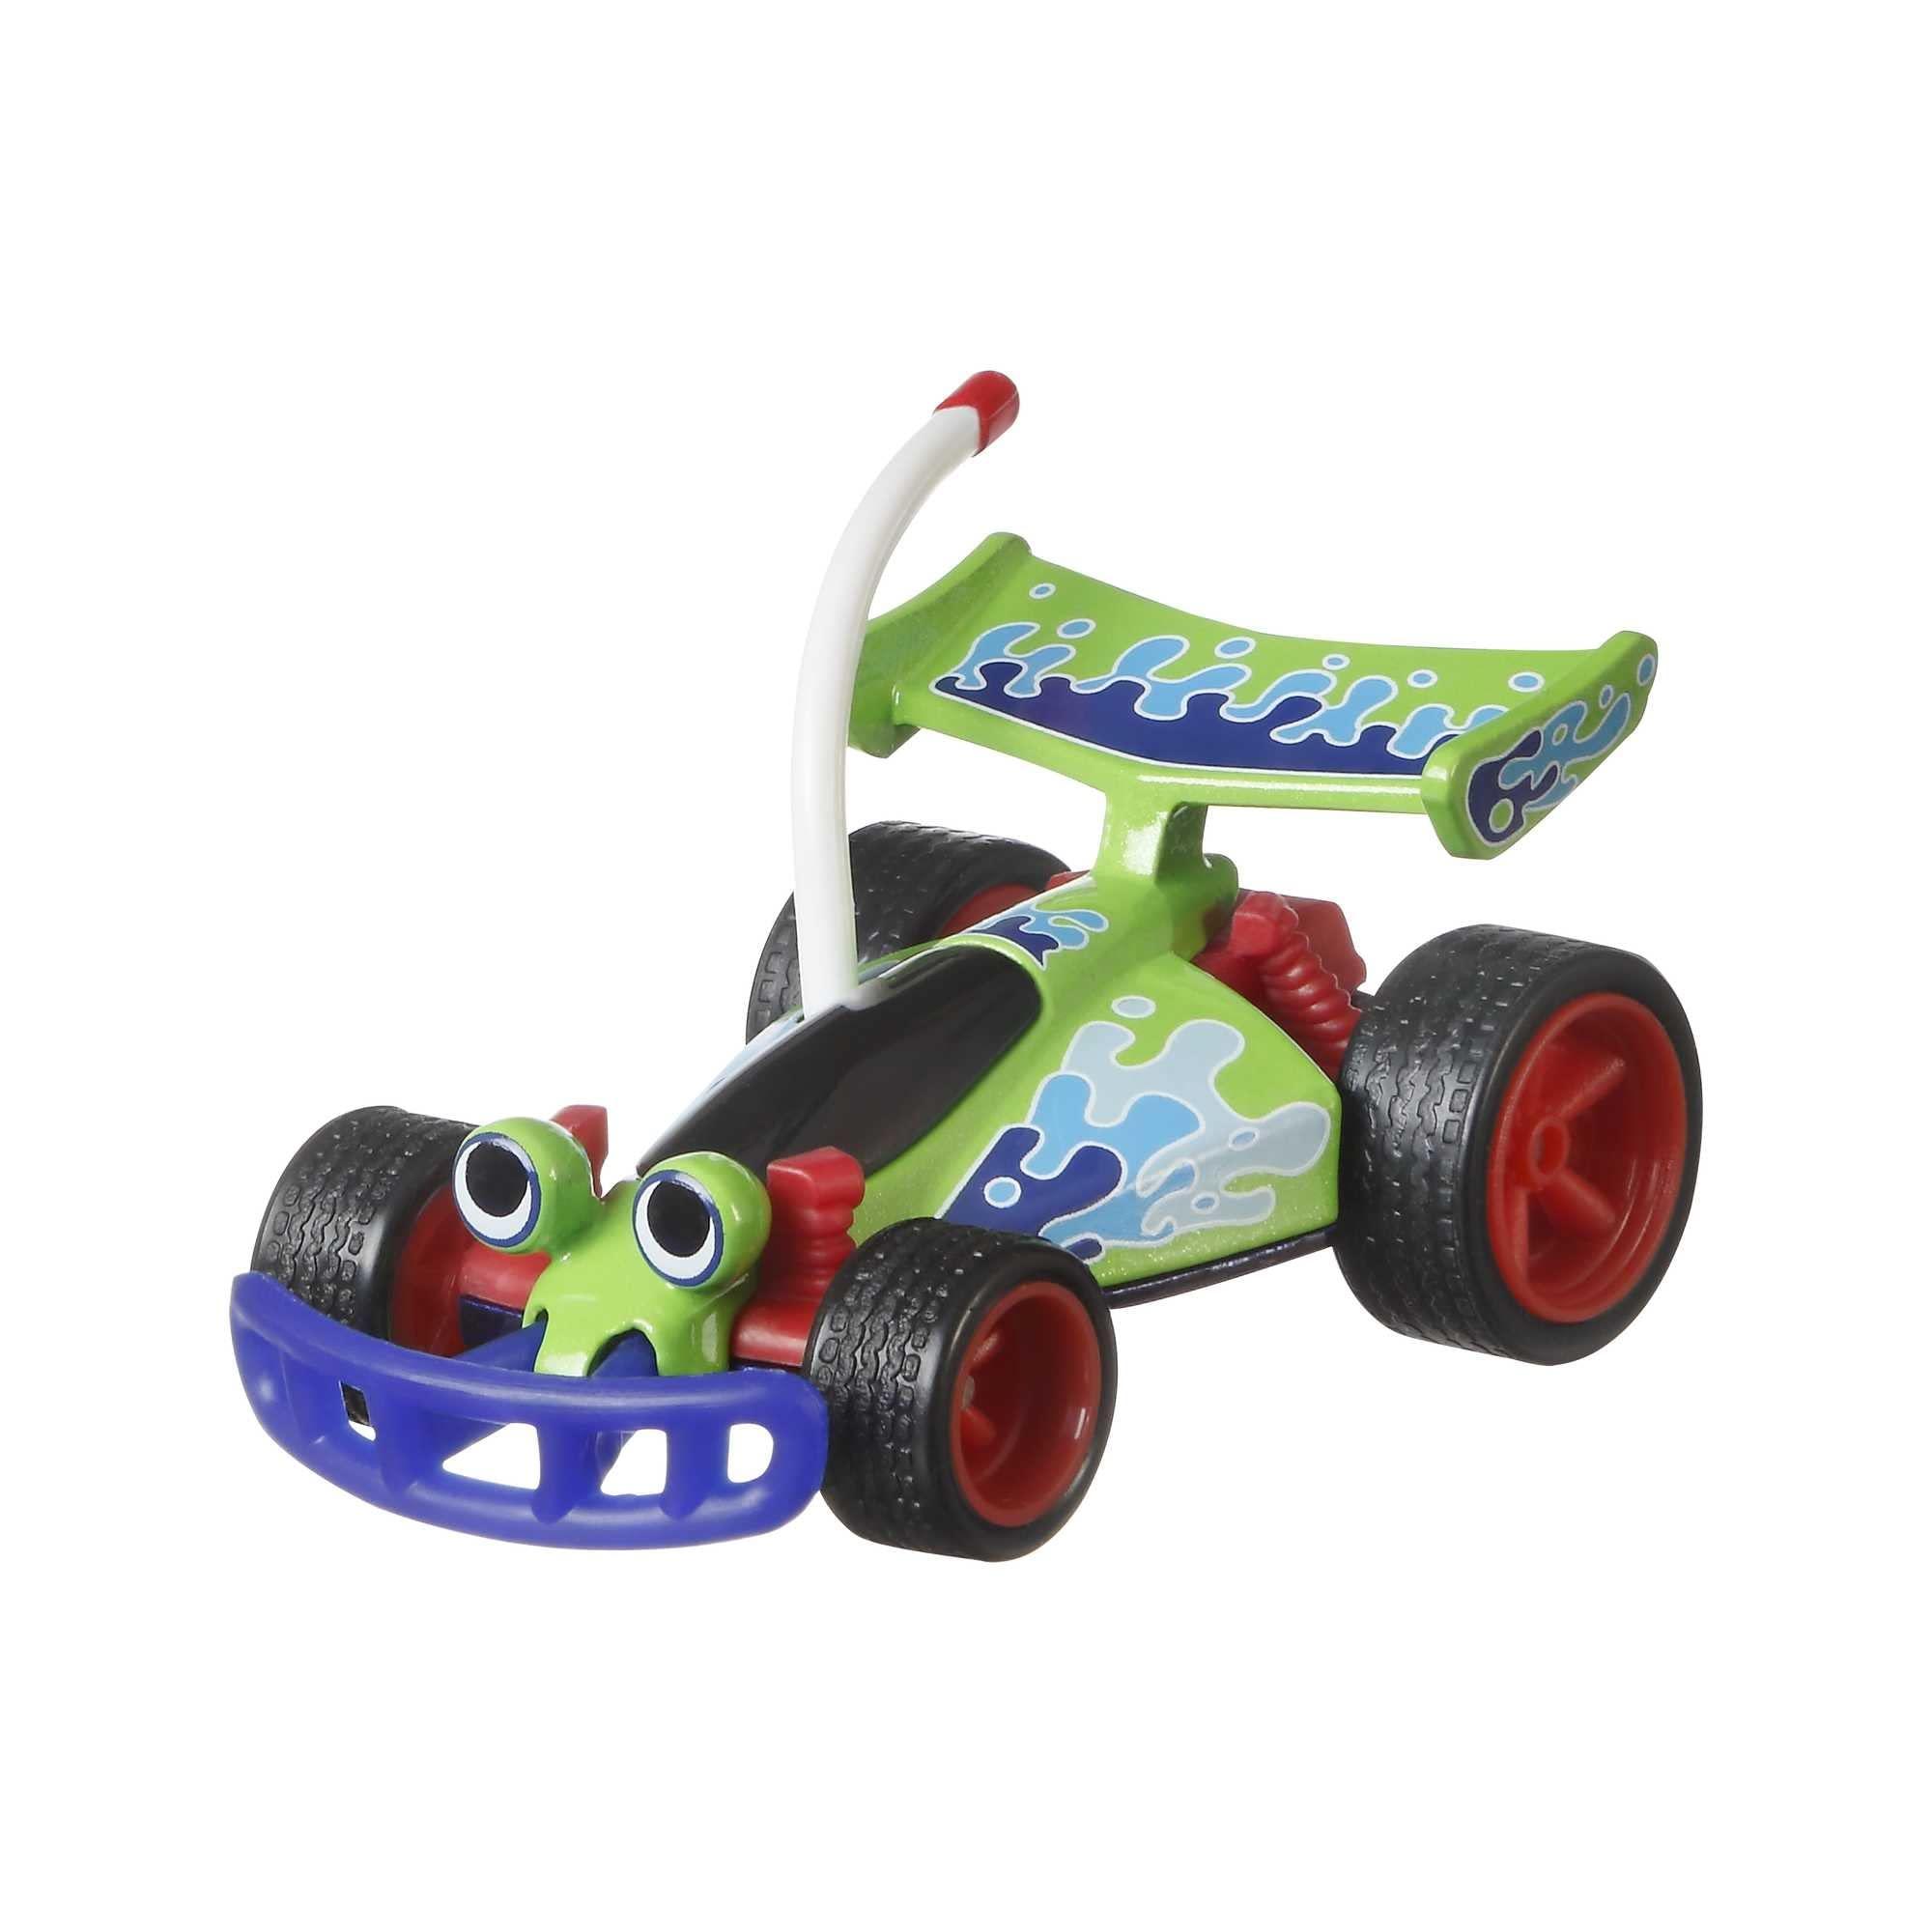 Toy Story Remote Control Car: Selecting the Perfect Toy Story Remote Control Car for Young Children